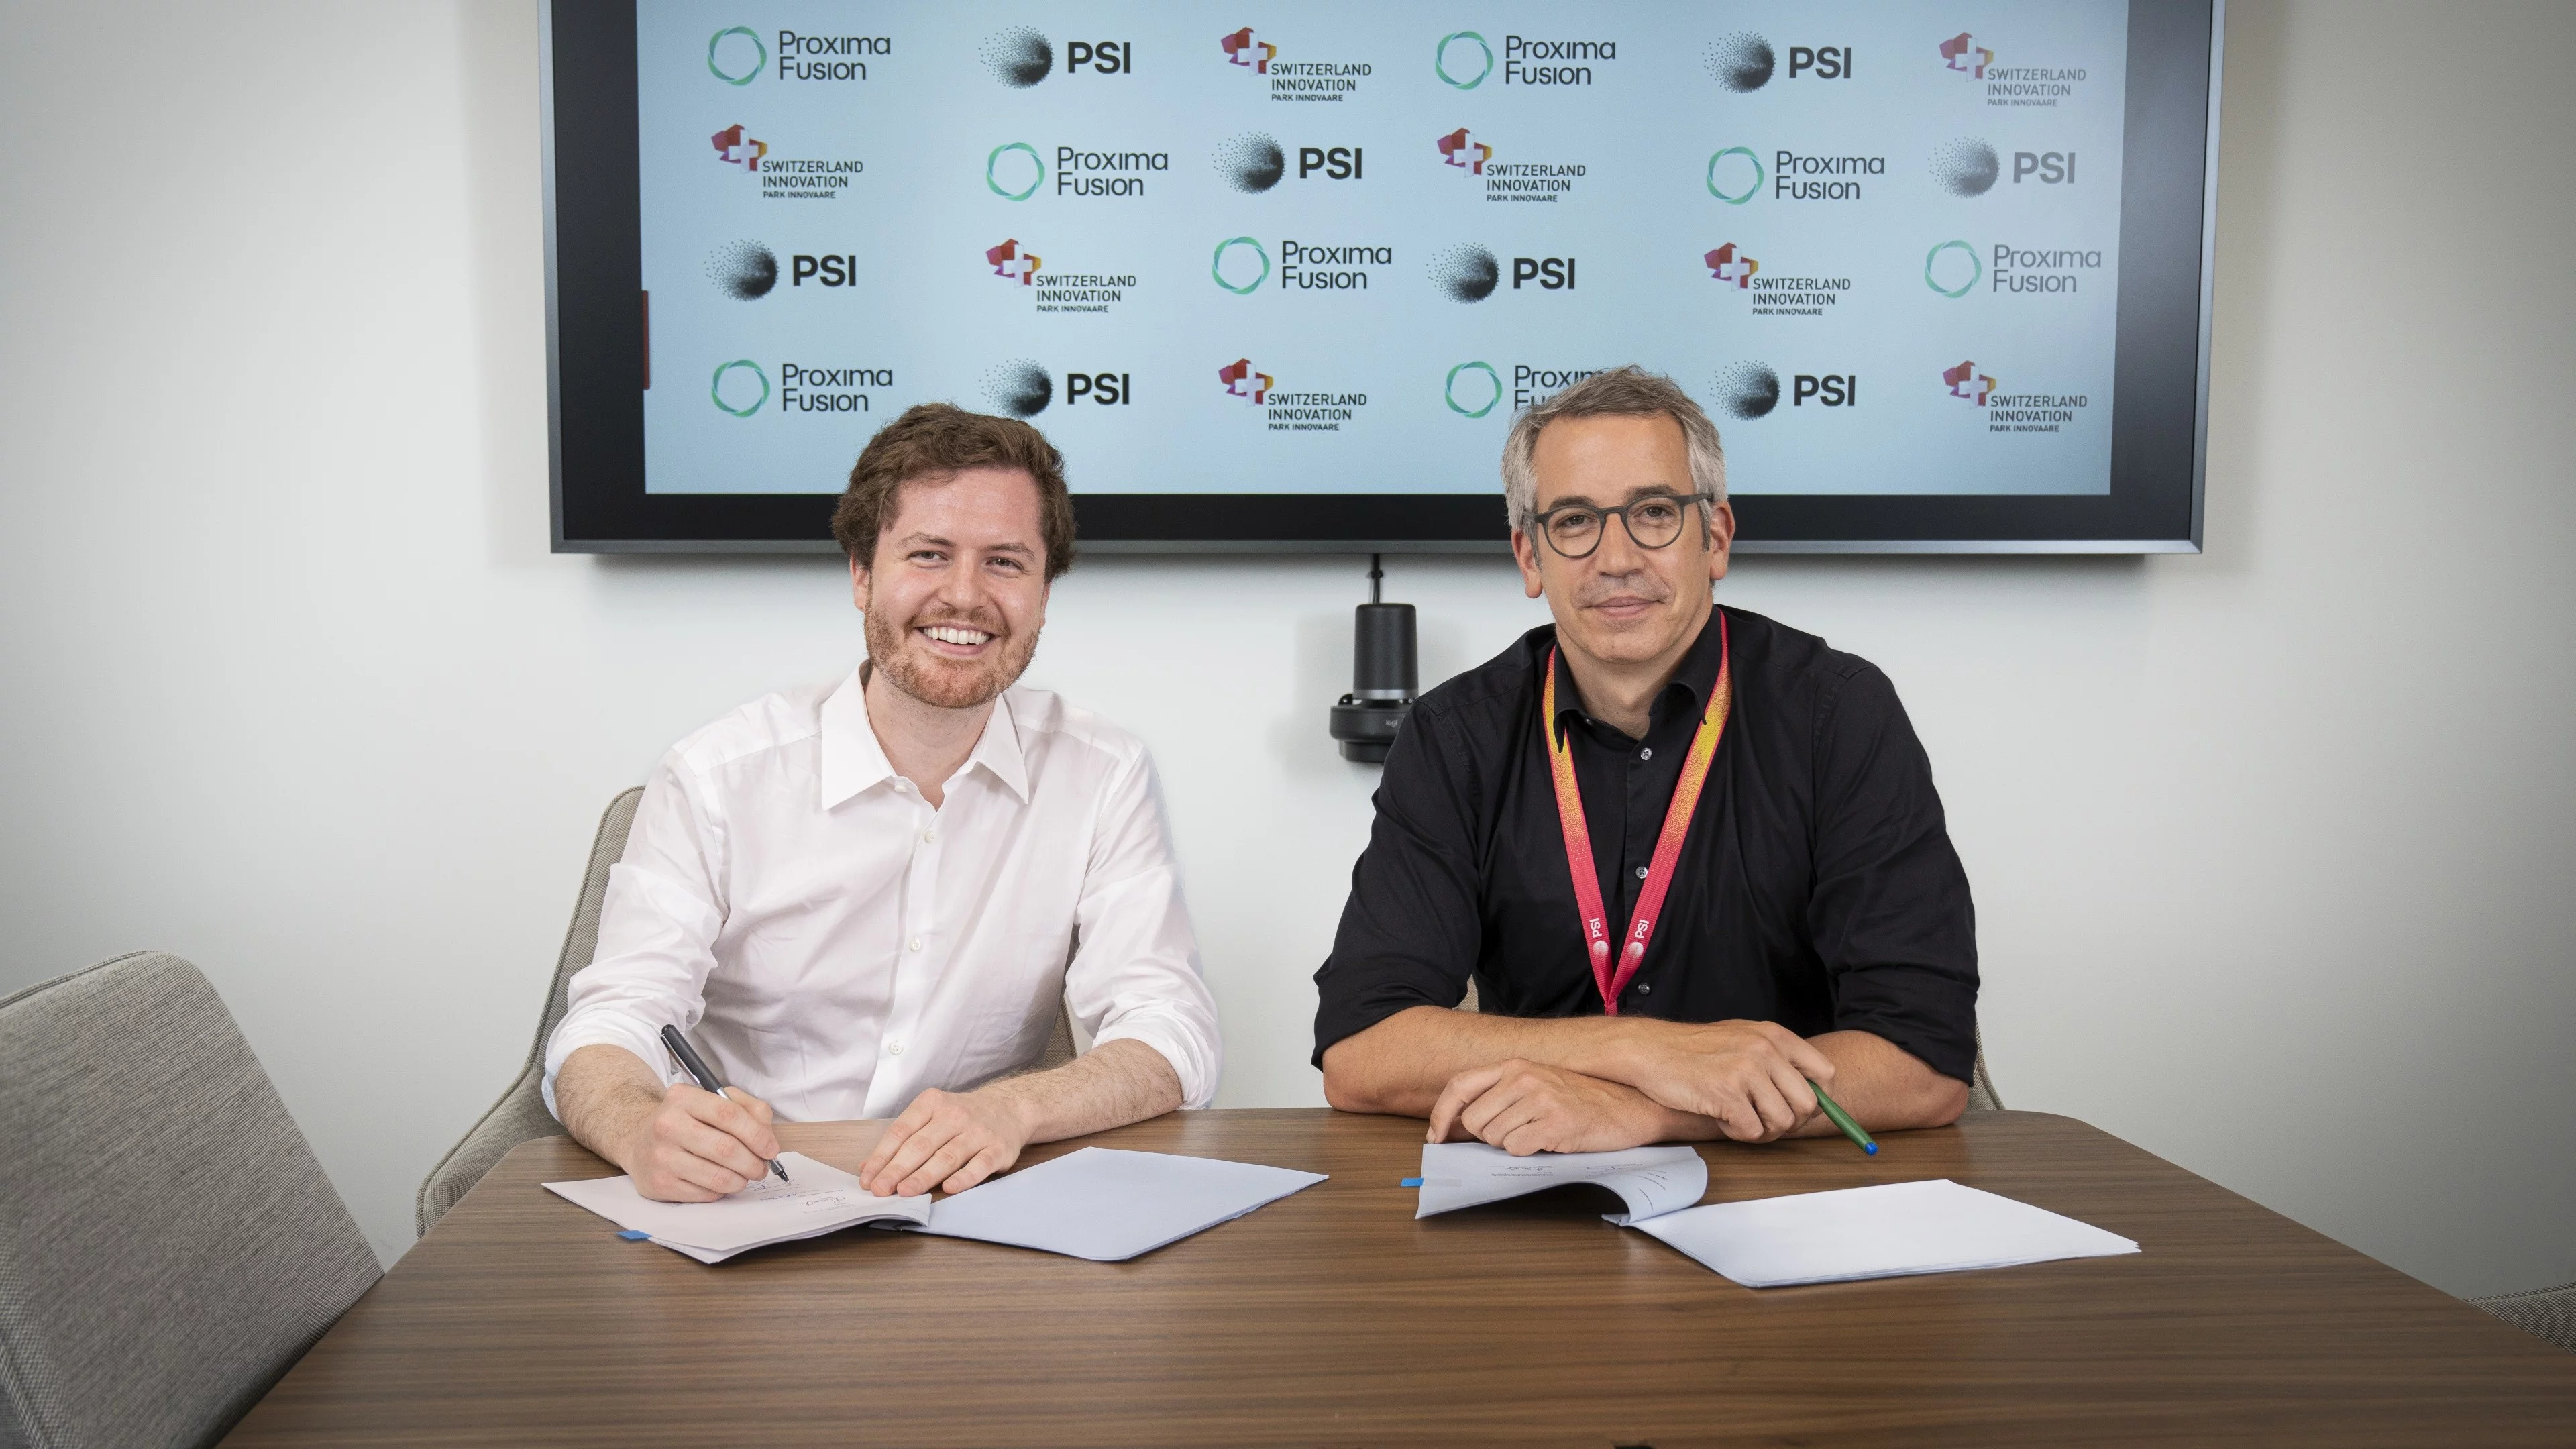 Proxima Co-Founder and COO Lucio Milanese (left) and PSI Director Christian Rüegg signed a framework agreement for the development of high-temperature superconducting (HTS) magnet technology